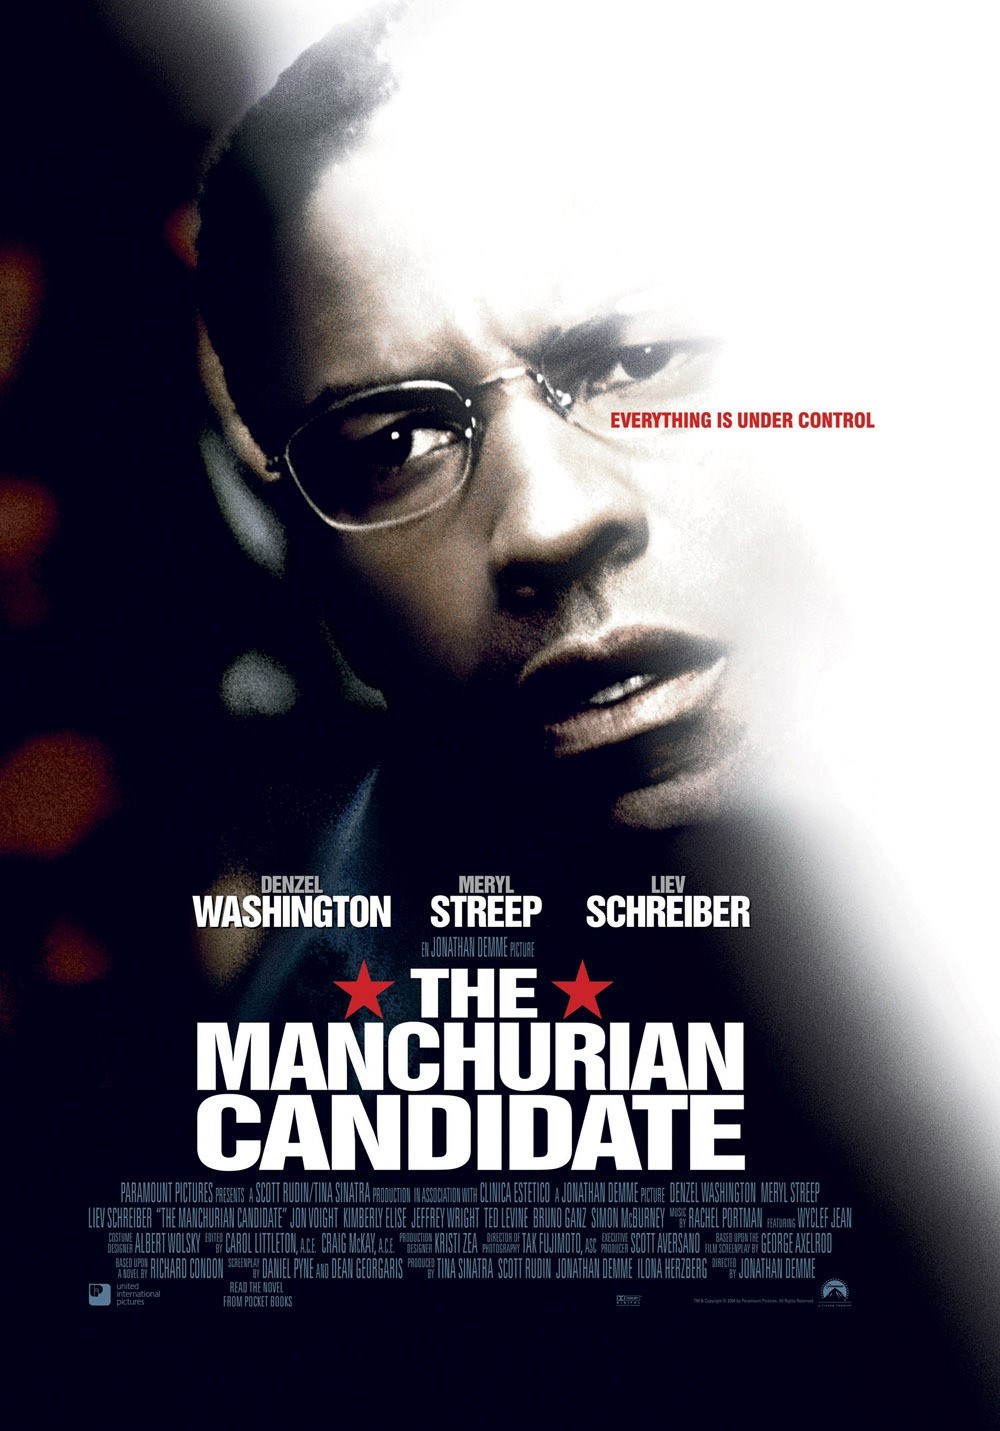 The Manchurian Candidate 2004 - Full (HD)